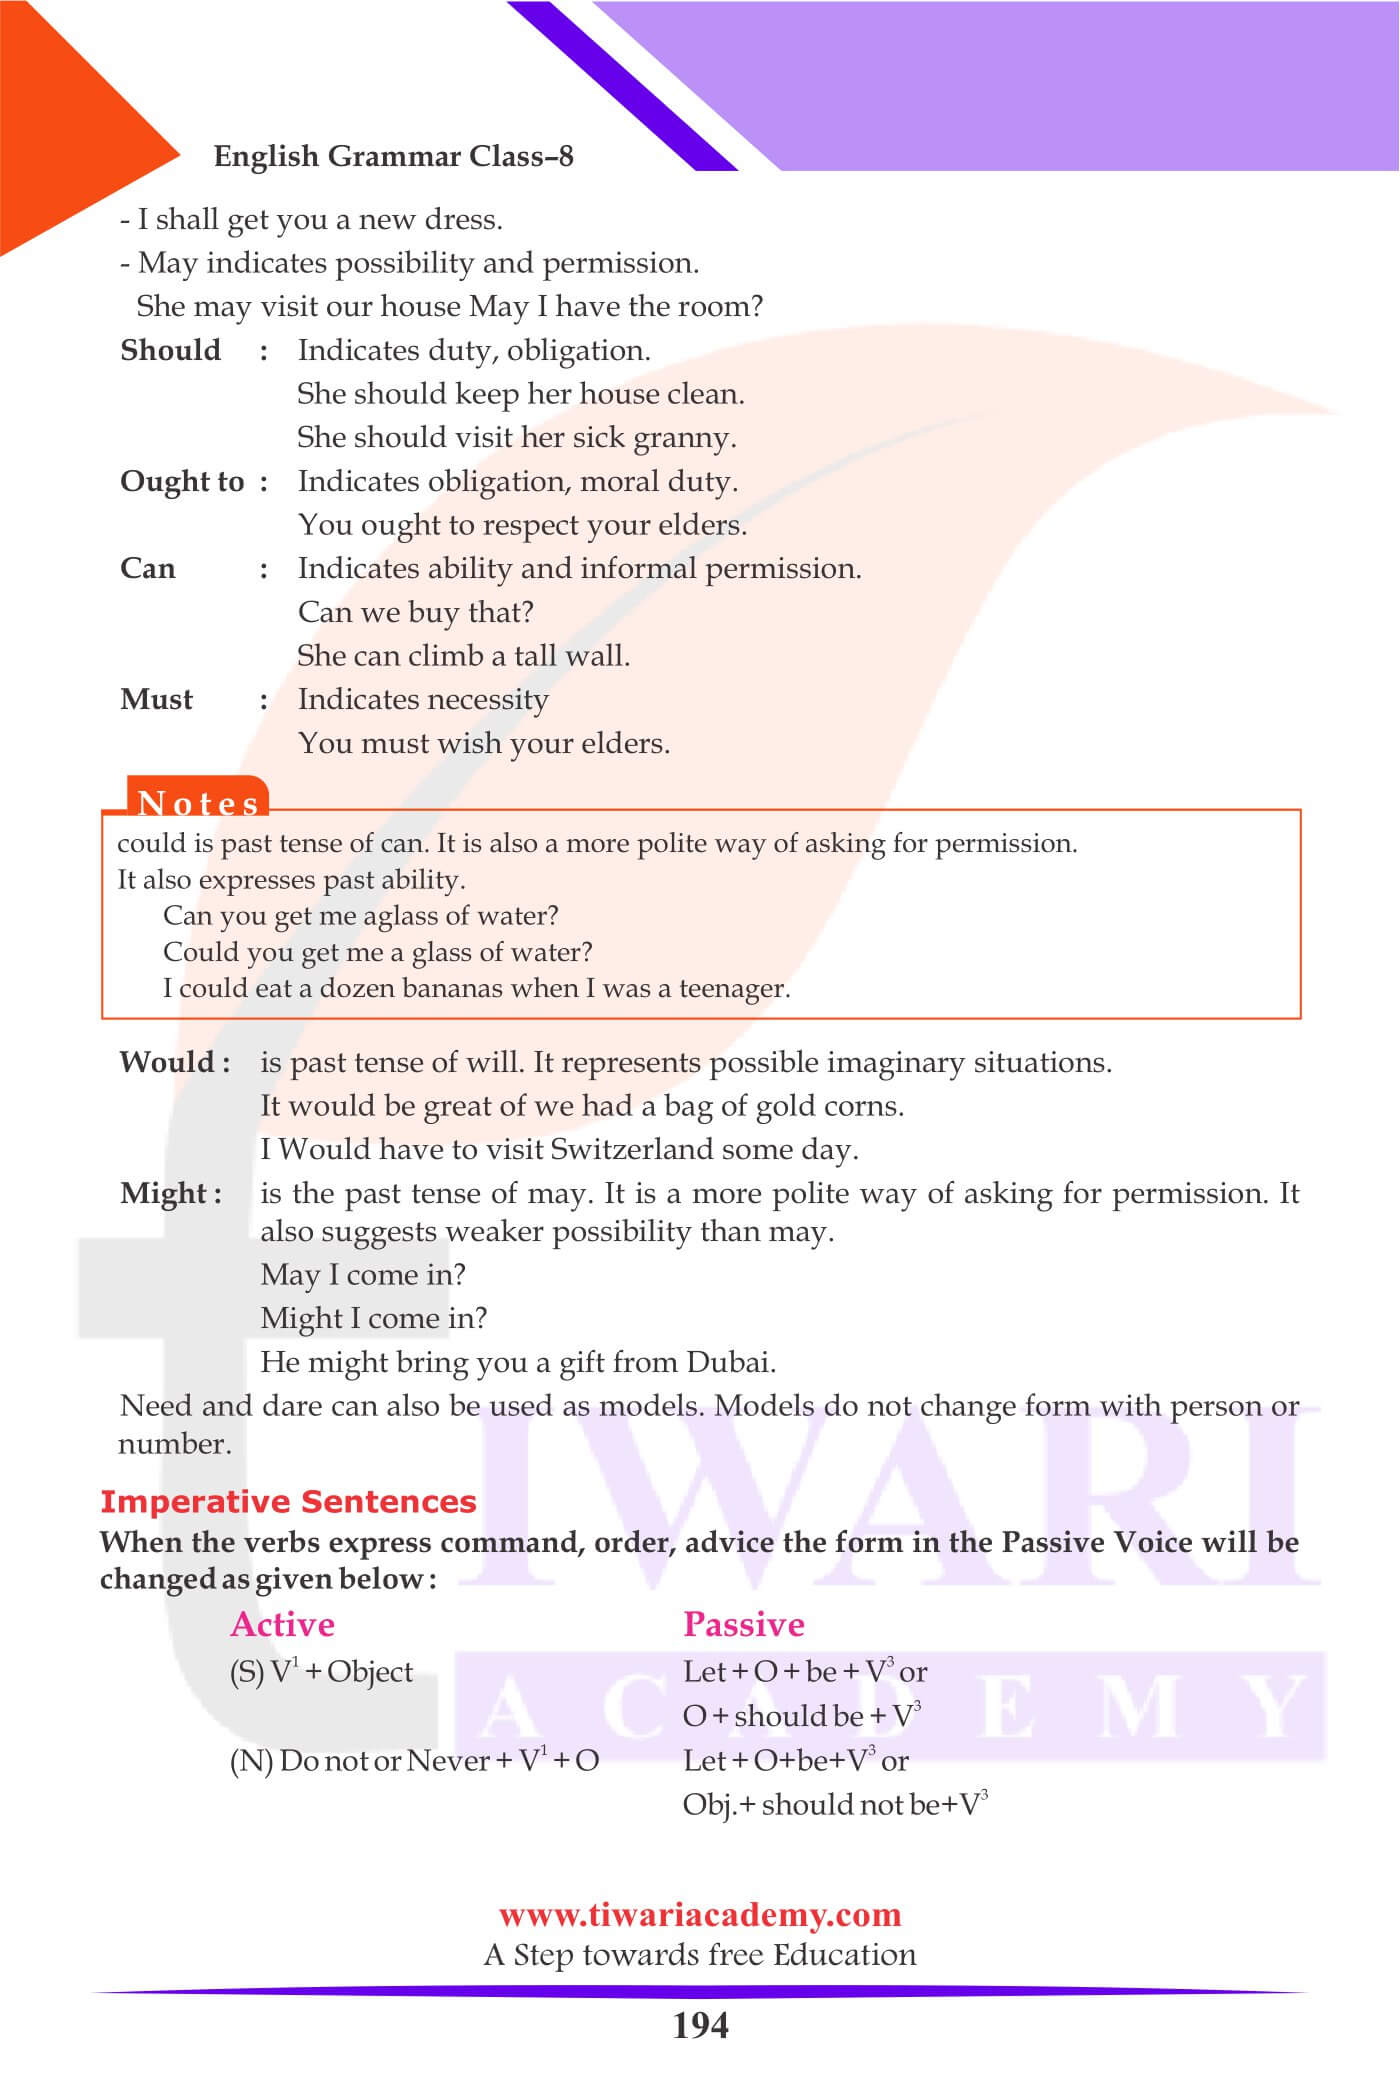 Class 8 English Grammar Use of Active Passive Voice